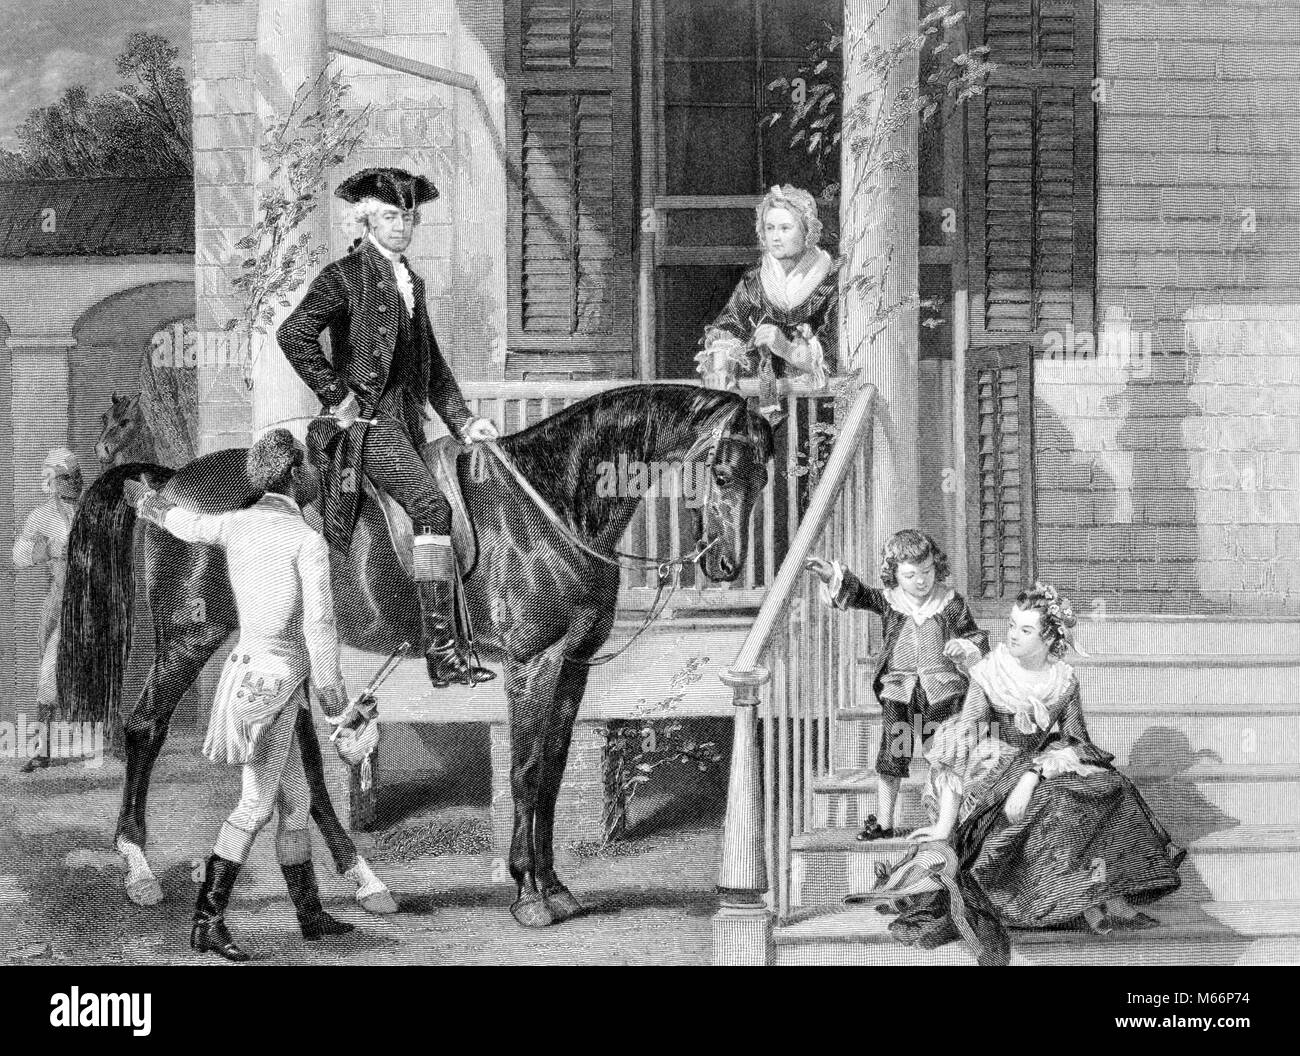 1700s 1760s GEORGE WASHINGTON ON HORSE WITH FAMILY MARTHA TWO GRANDCHILDREN AND SERVANT AT PORCH STEPS OF MOUNT VERNON VIRGINIA - q53000 CPC001 HARS VIRGINIA HORSES COLONIAL CAUCASIAN LIFESTYLE HISTORY FEMALES MARRIED RURAL SPOUSE HUSBANDS PRESIDENT HOME LIFE UNITED STATES COPY SPACE FULL-LENGTH MOUNT UNITED STATES OF AMERICA ANIMALS GRANDCHILDREN TRANSPORTATION NOSTALGIA MIDDLE-AGED NORTH AMERICA MIDDLE-AGED MAN 3-4 YEARS 40-45 YEARS 45-50 YEARS 7-9 YEARS HISTORIC ONE ANIMAL WIVES HAPPINESS MAMMALS MIDDLE-AGED WOMAN STRENGTH AFRICAN-AMERICANS AFRICAN-AMERICAN AND LEADERSHIP BLACK ETHNICITY Stock Photo